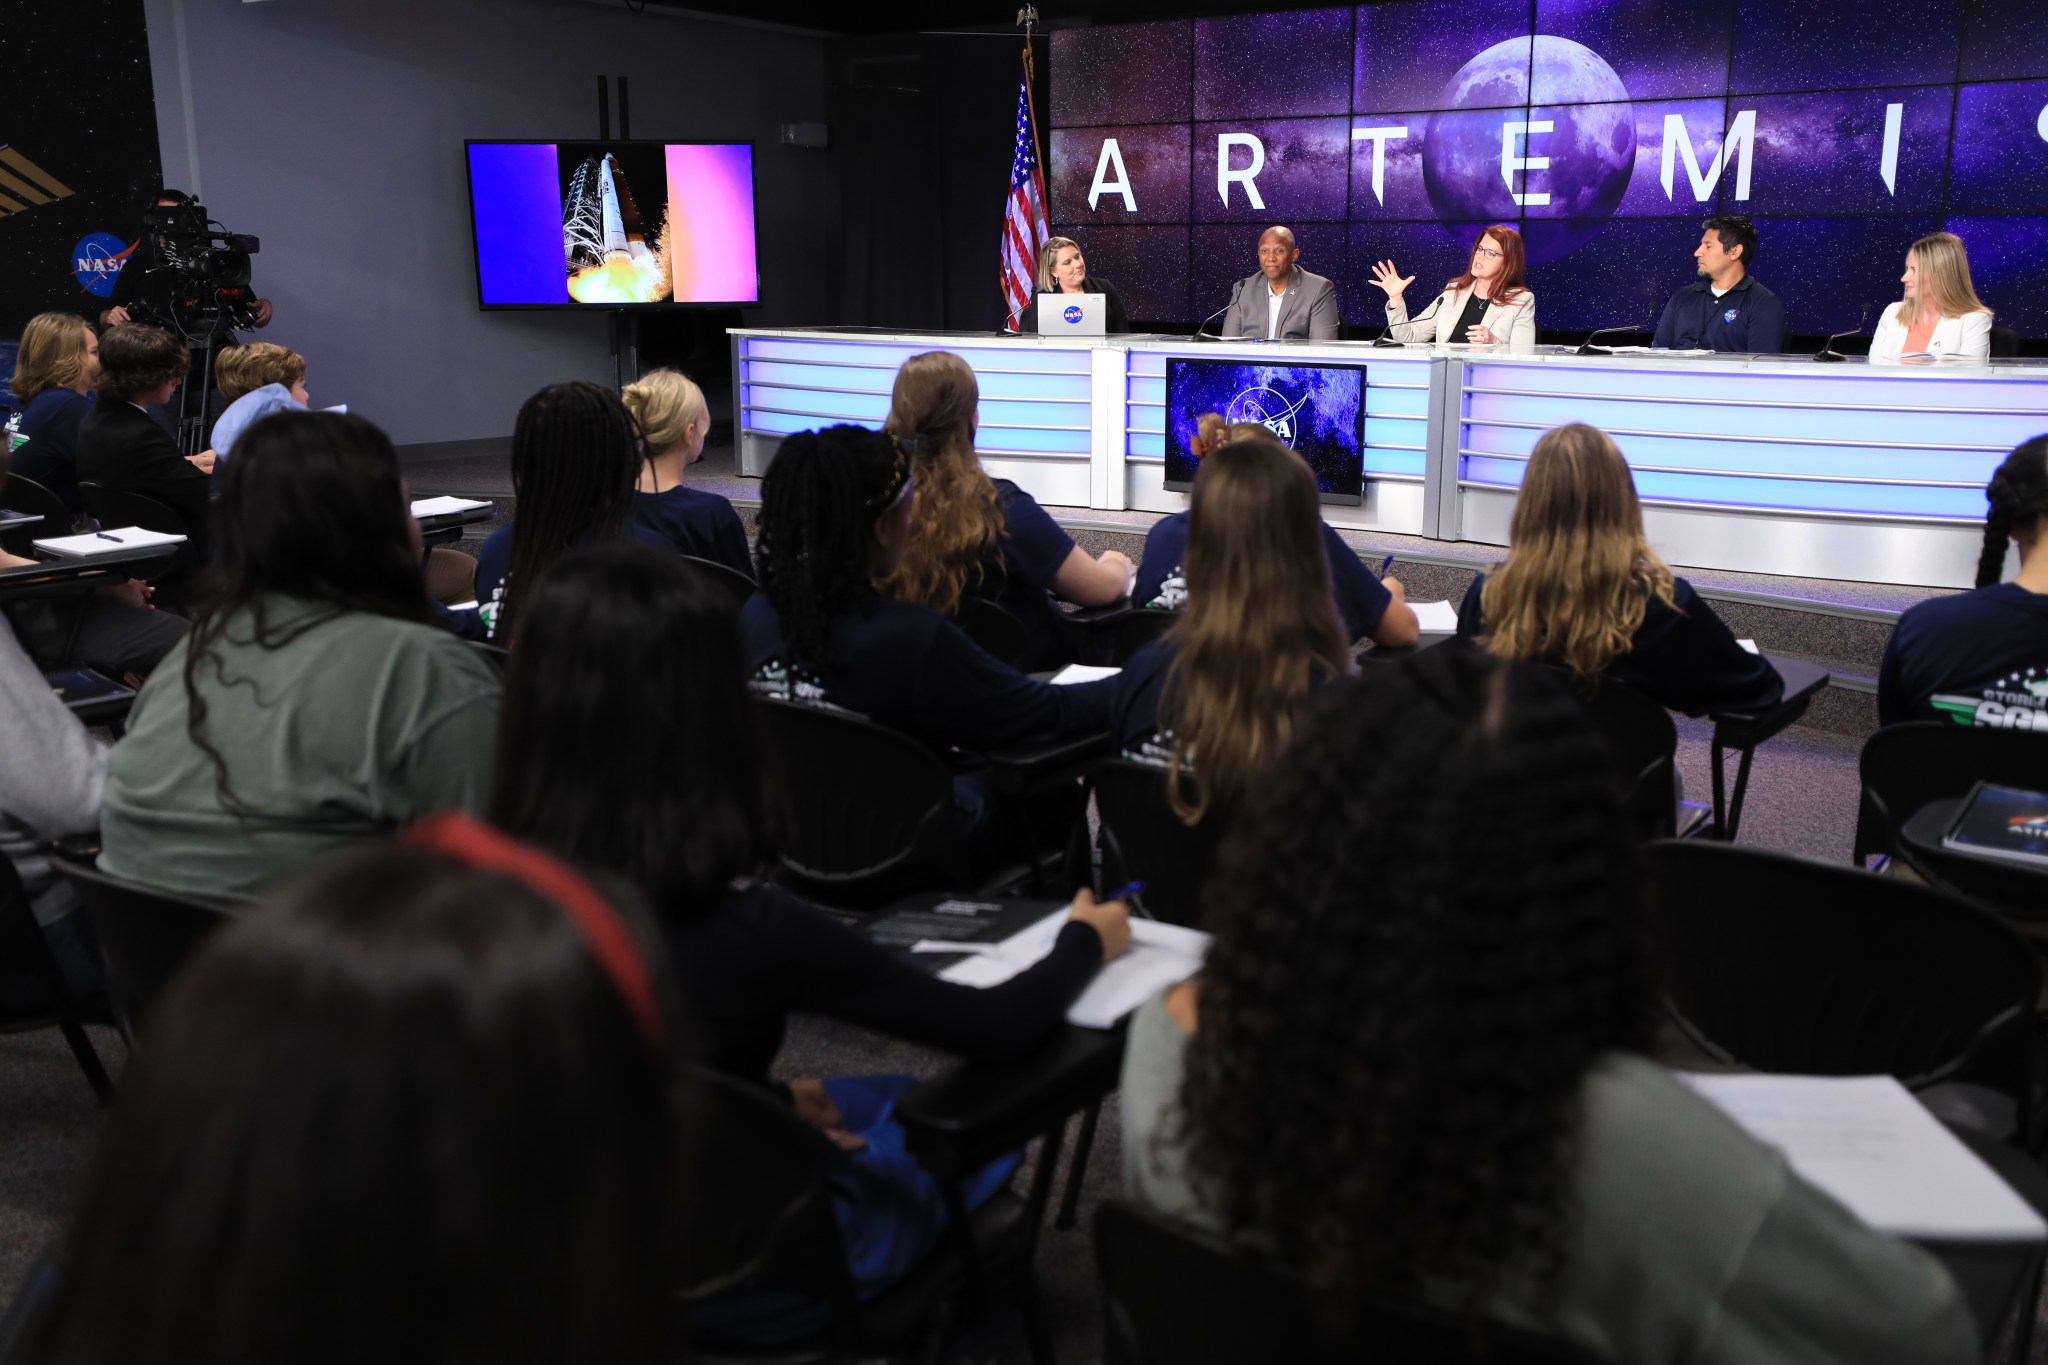 Kennedy leaders address students during an Artemis I student media briefing at NASA's Kennedy Space Center in Florida.